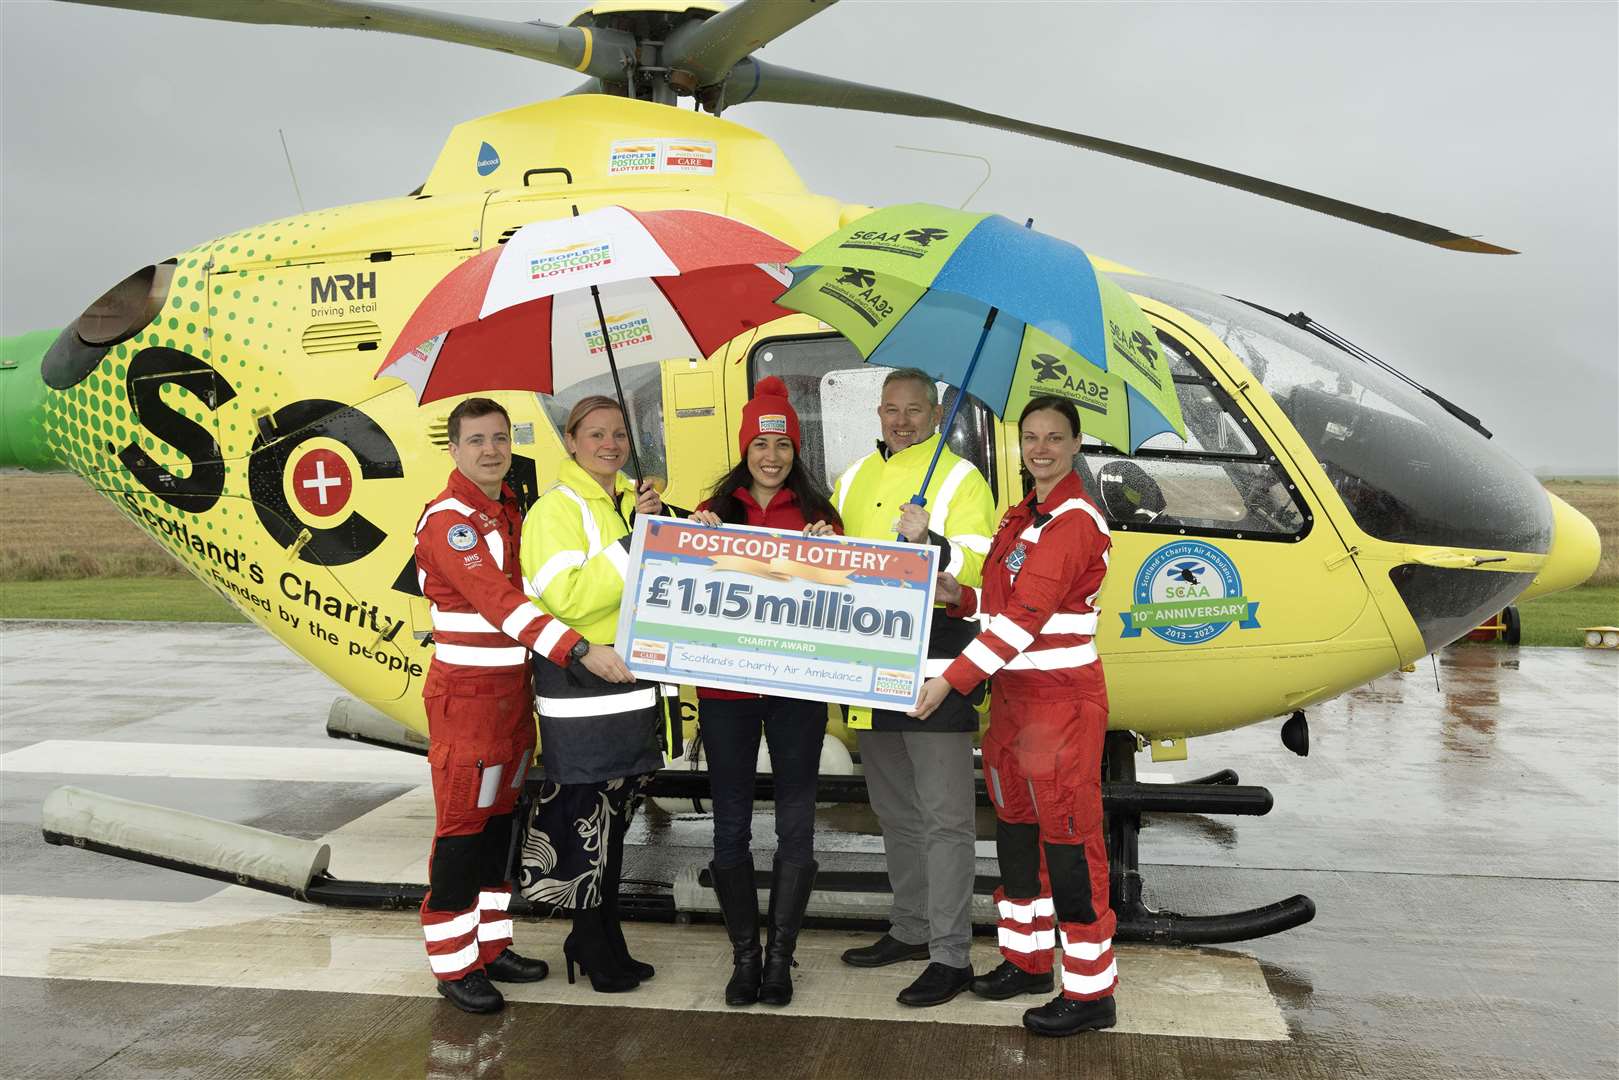 The People’s Postcode Lottery has donated more than £1 million to Scotland’s Charity Air Ambulance.